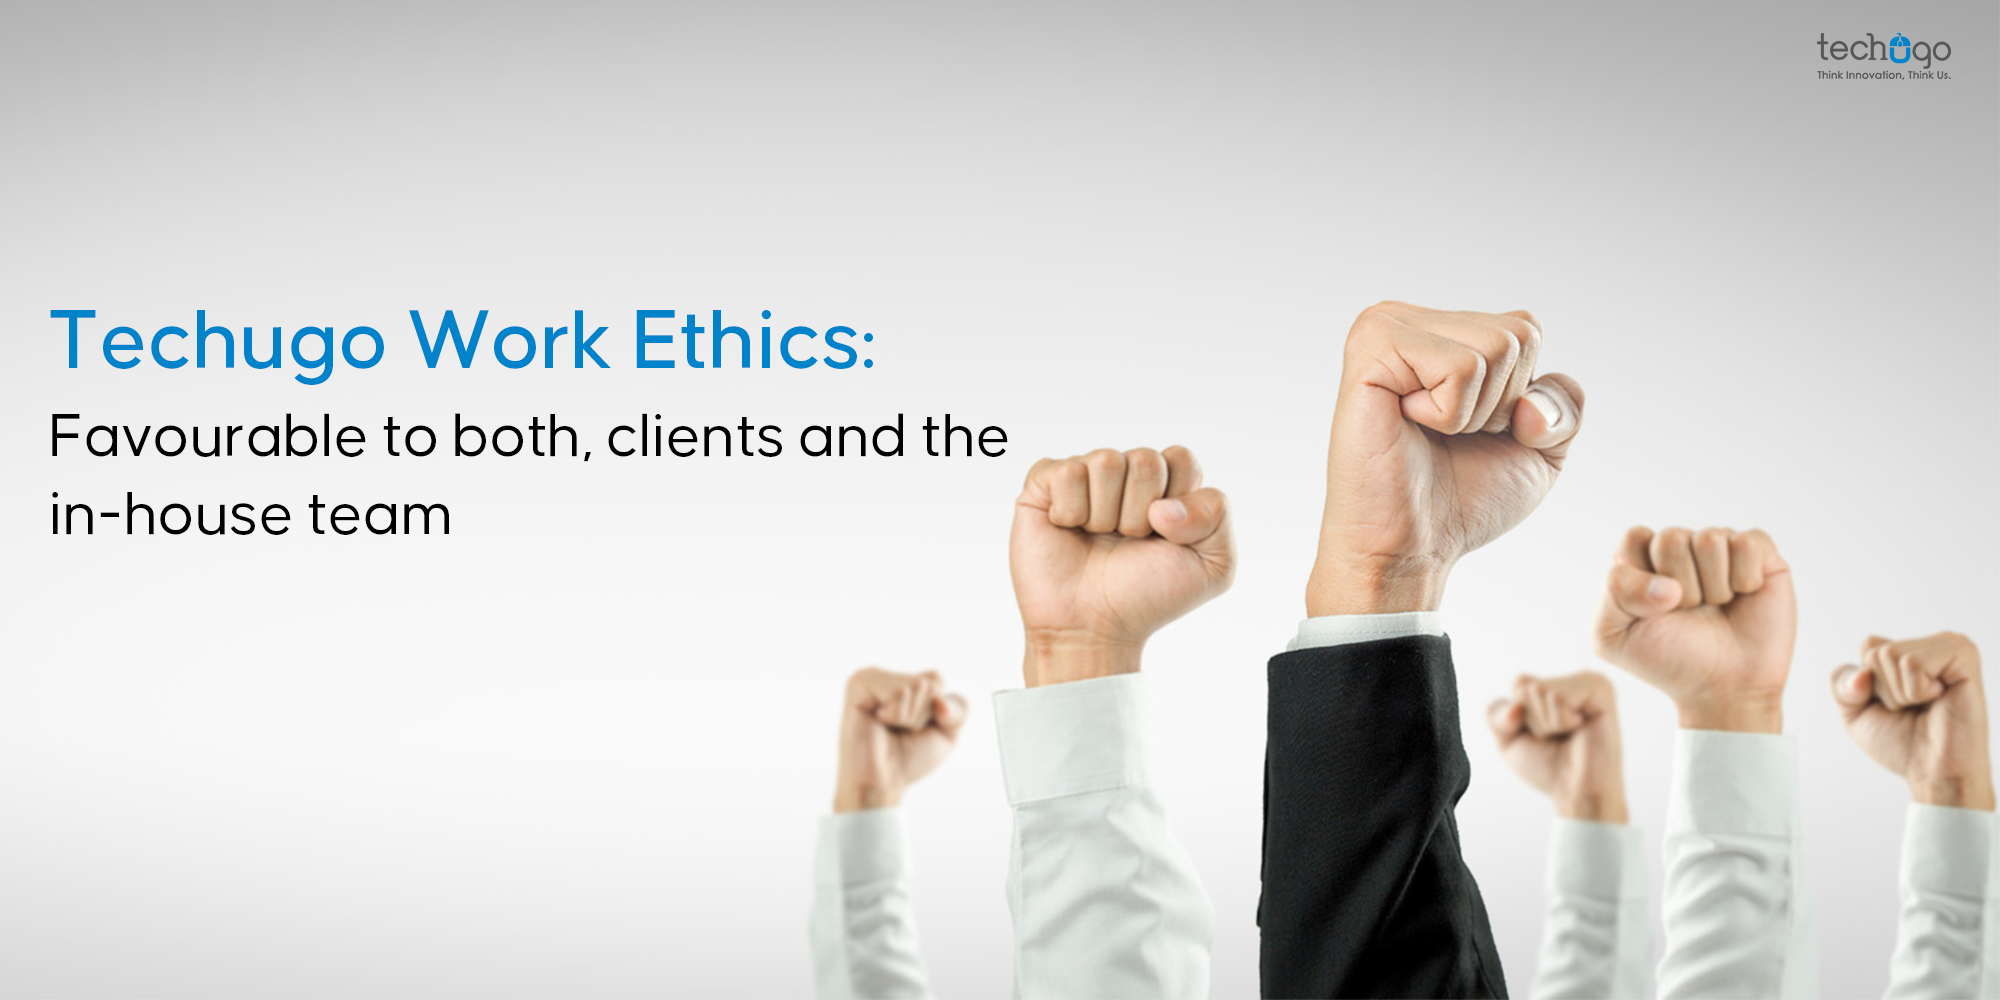 Techugo Work Ethics: Favourable To Both, Clients And The In-House Team